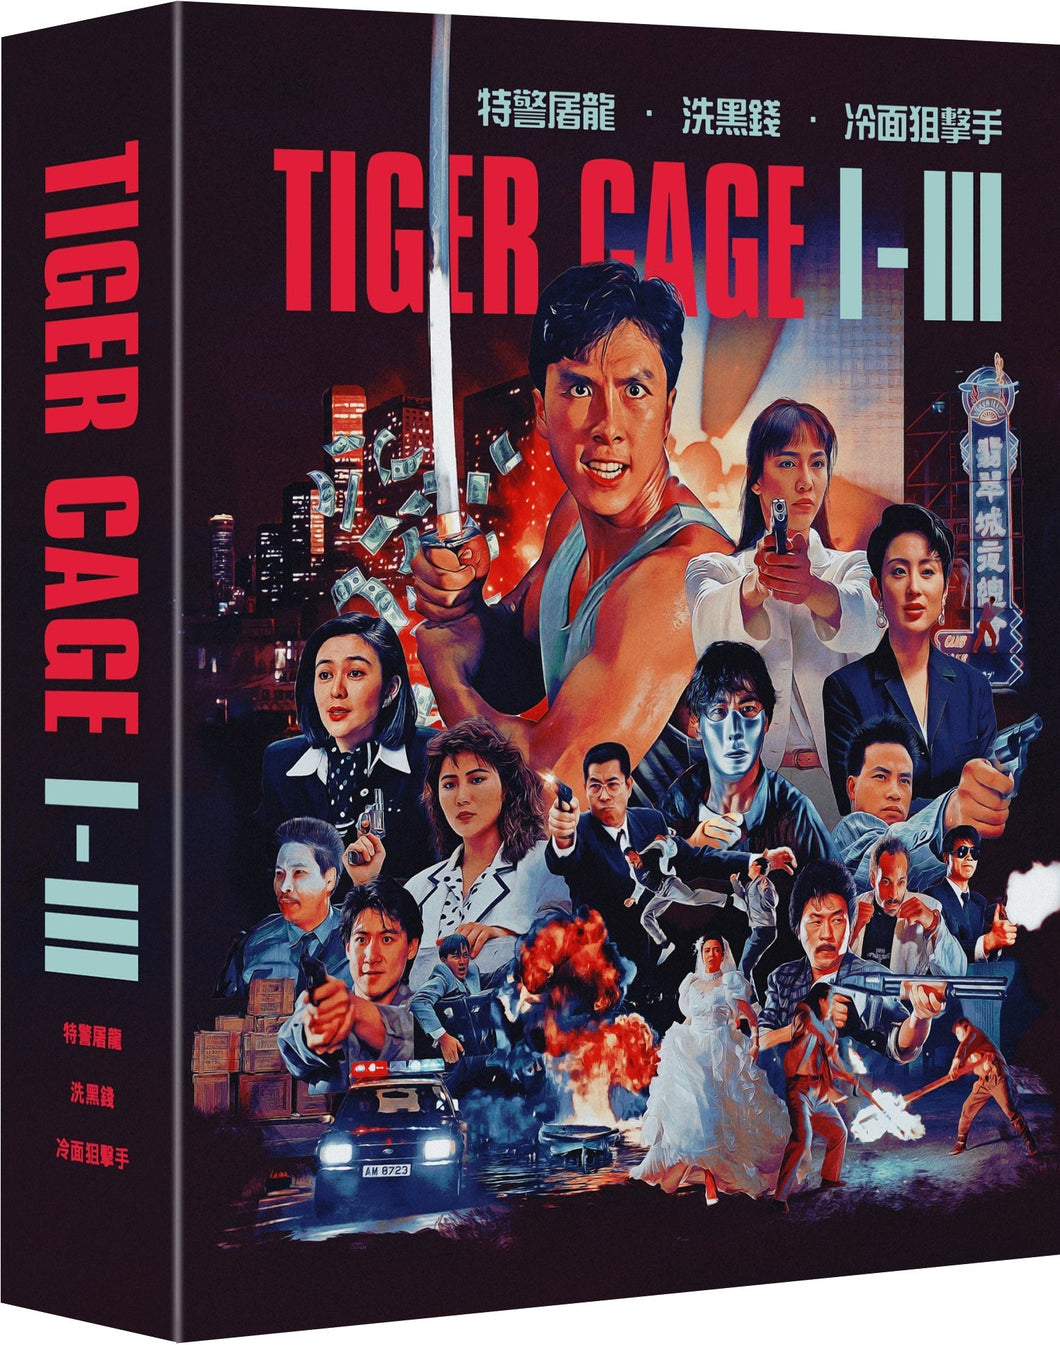 Tiger Cage Trilogy (1988-1991) de Woo-Ping Yuen - front cover